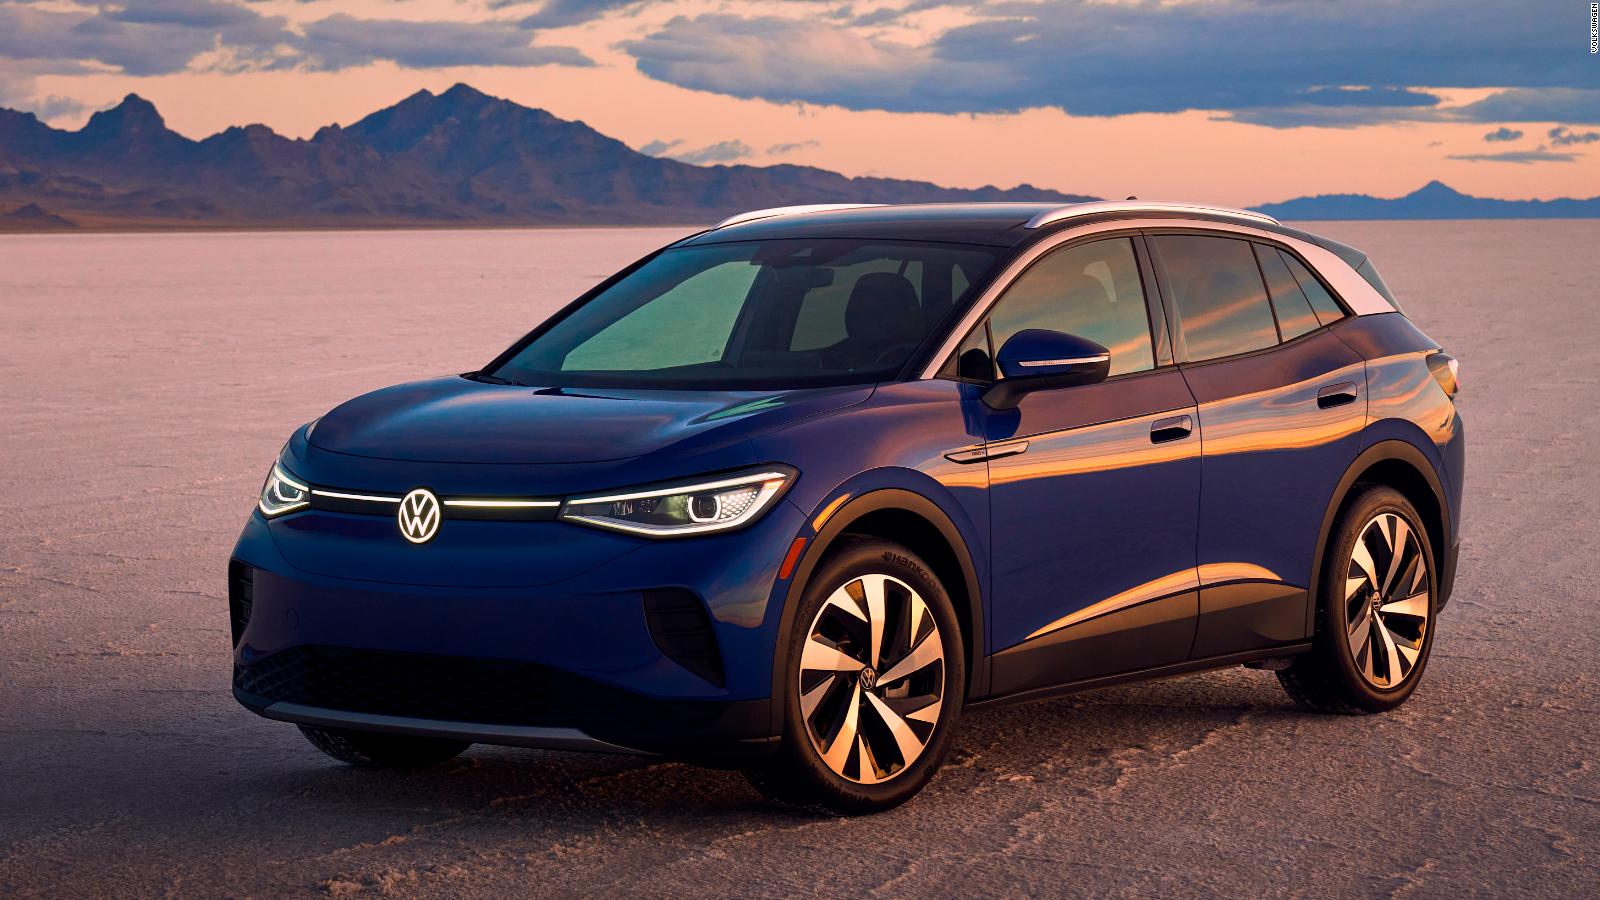 Volkswagen en GM joins Tesla with these new electric SUVs